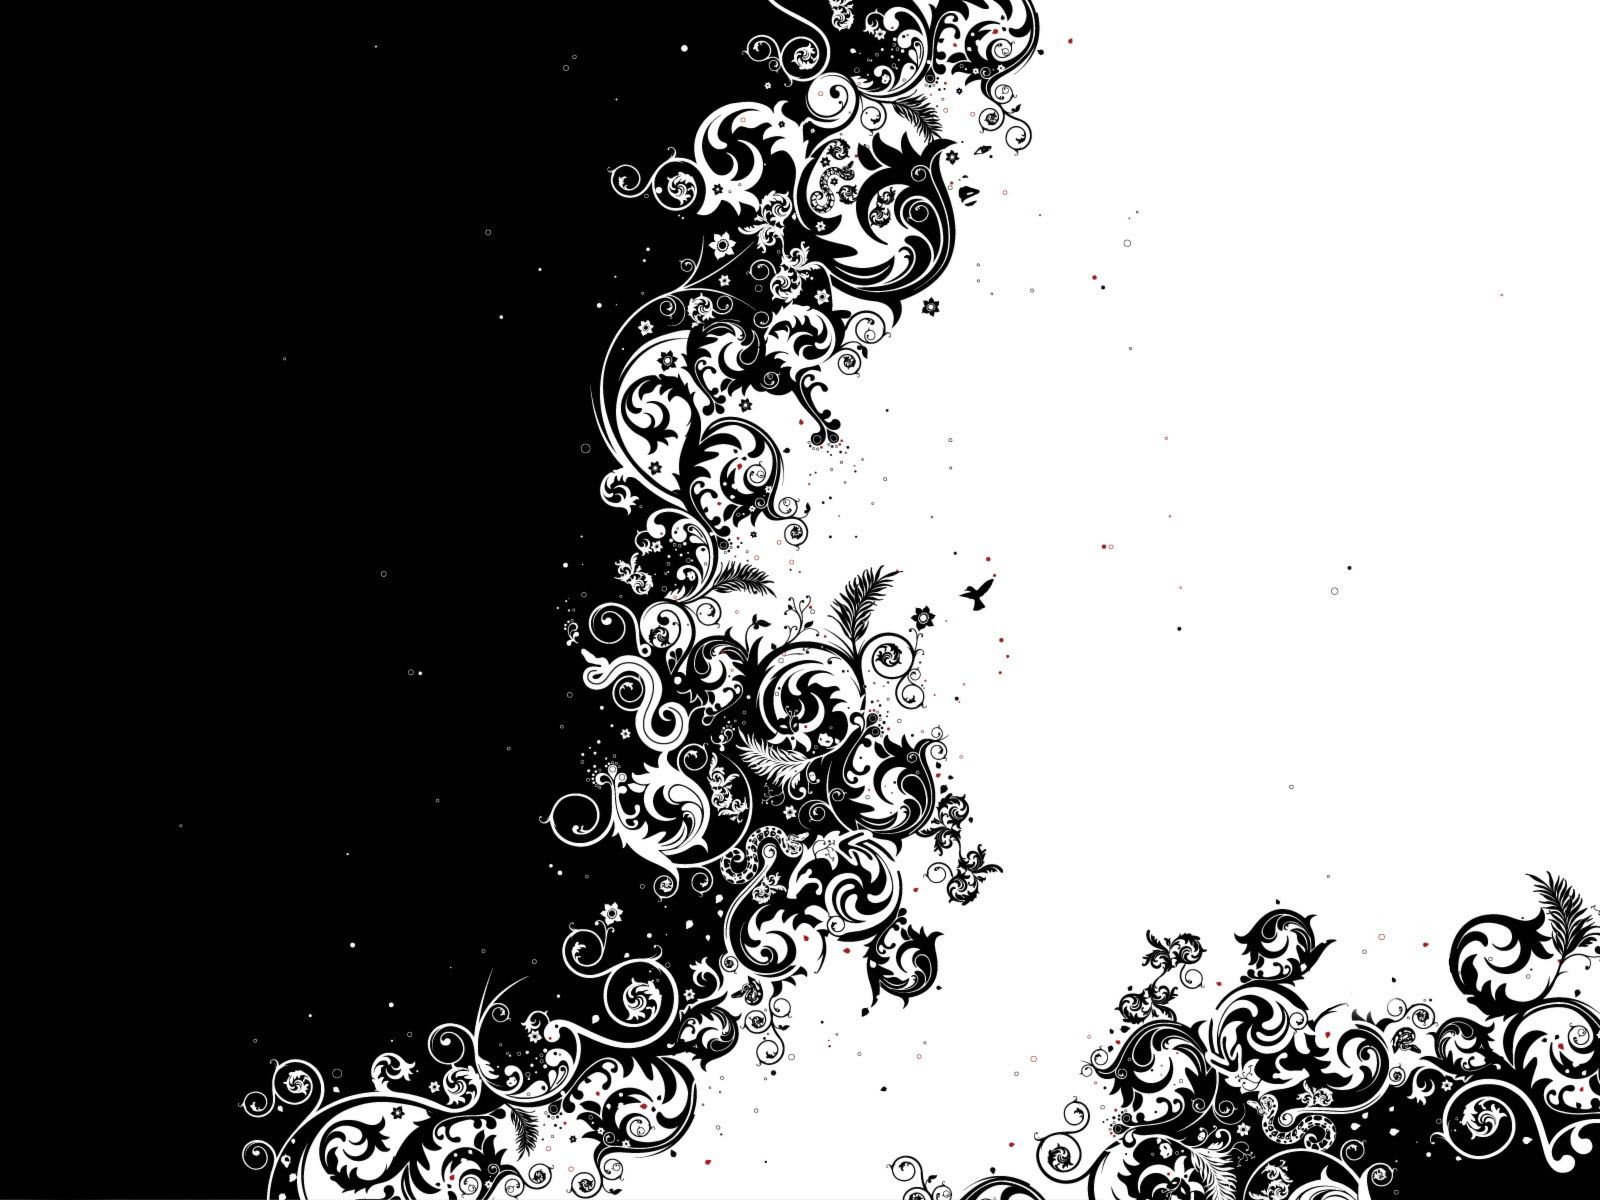 patterns, lines, light, vector, shine, bw, chb lock screen backgrounds